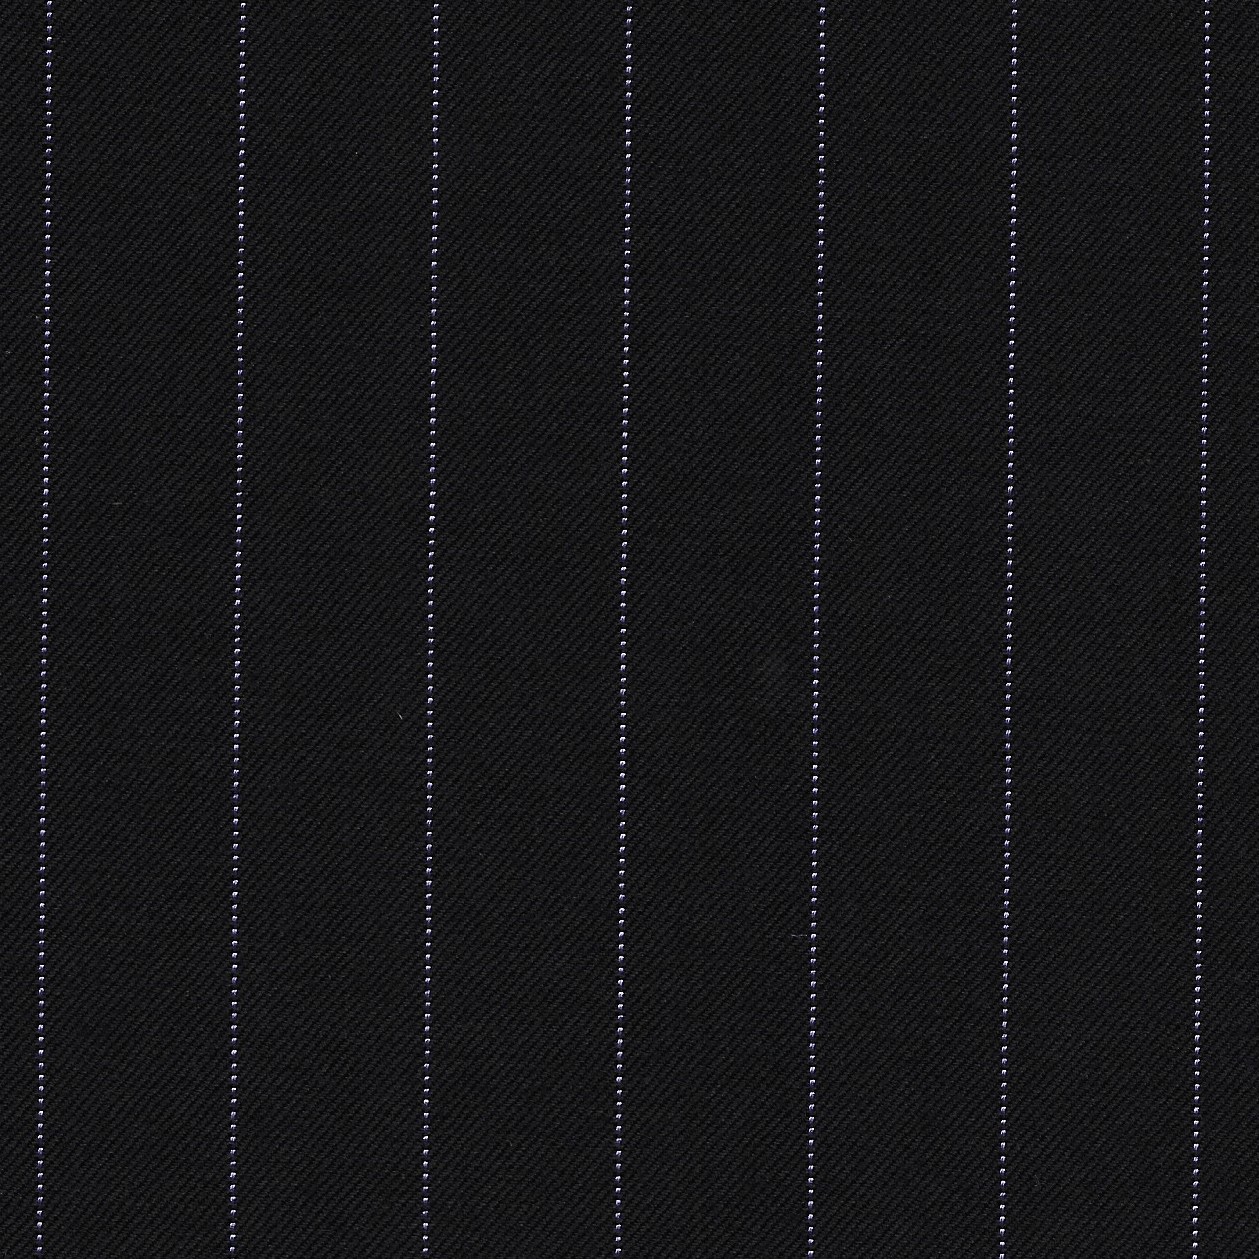 Dormeuil Finest 15.7 Super 160s Navy Blue with Stripes